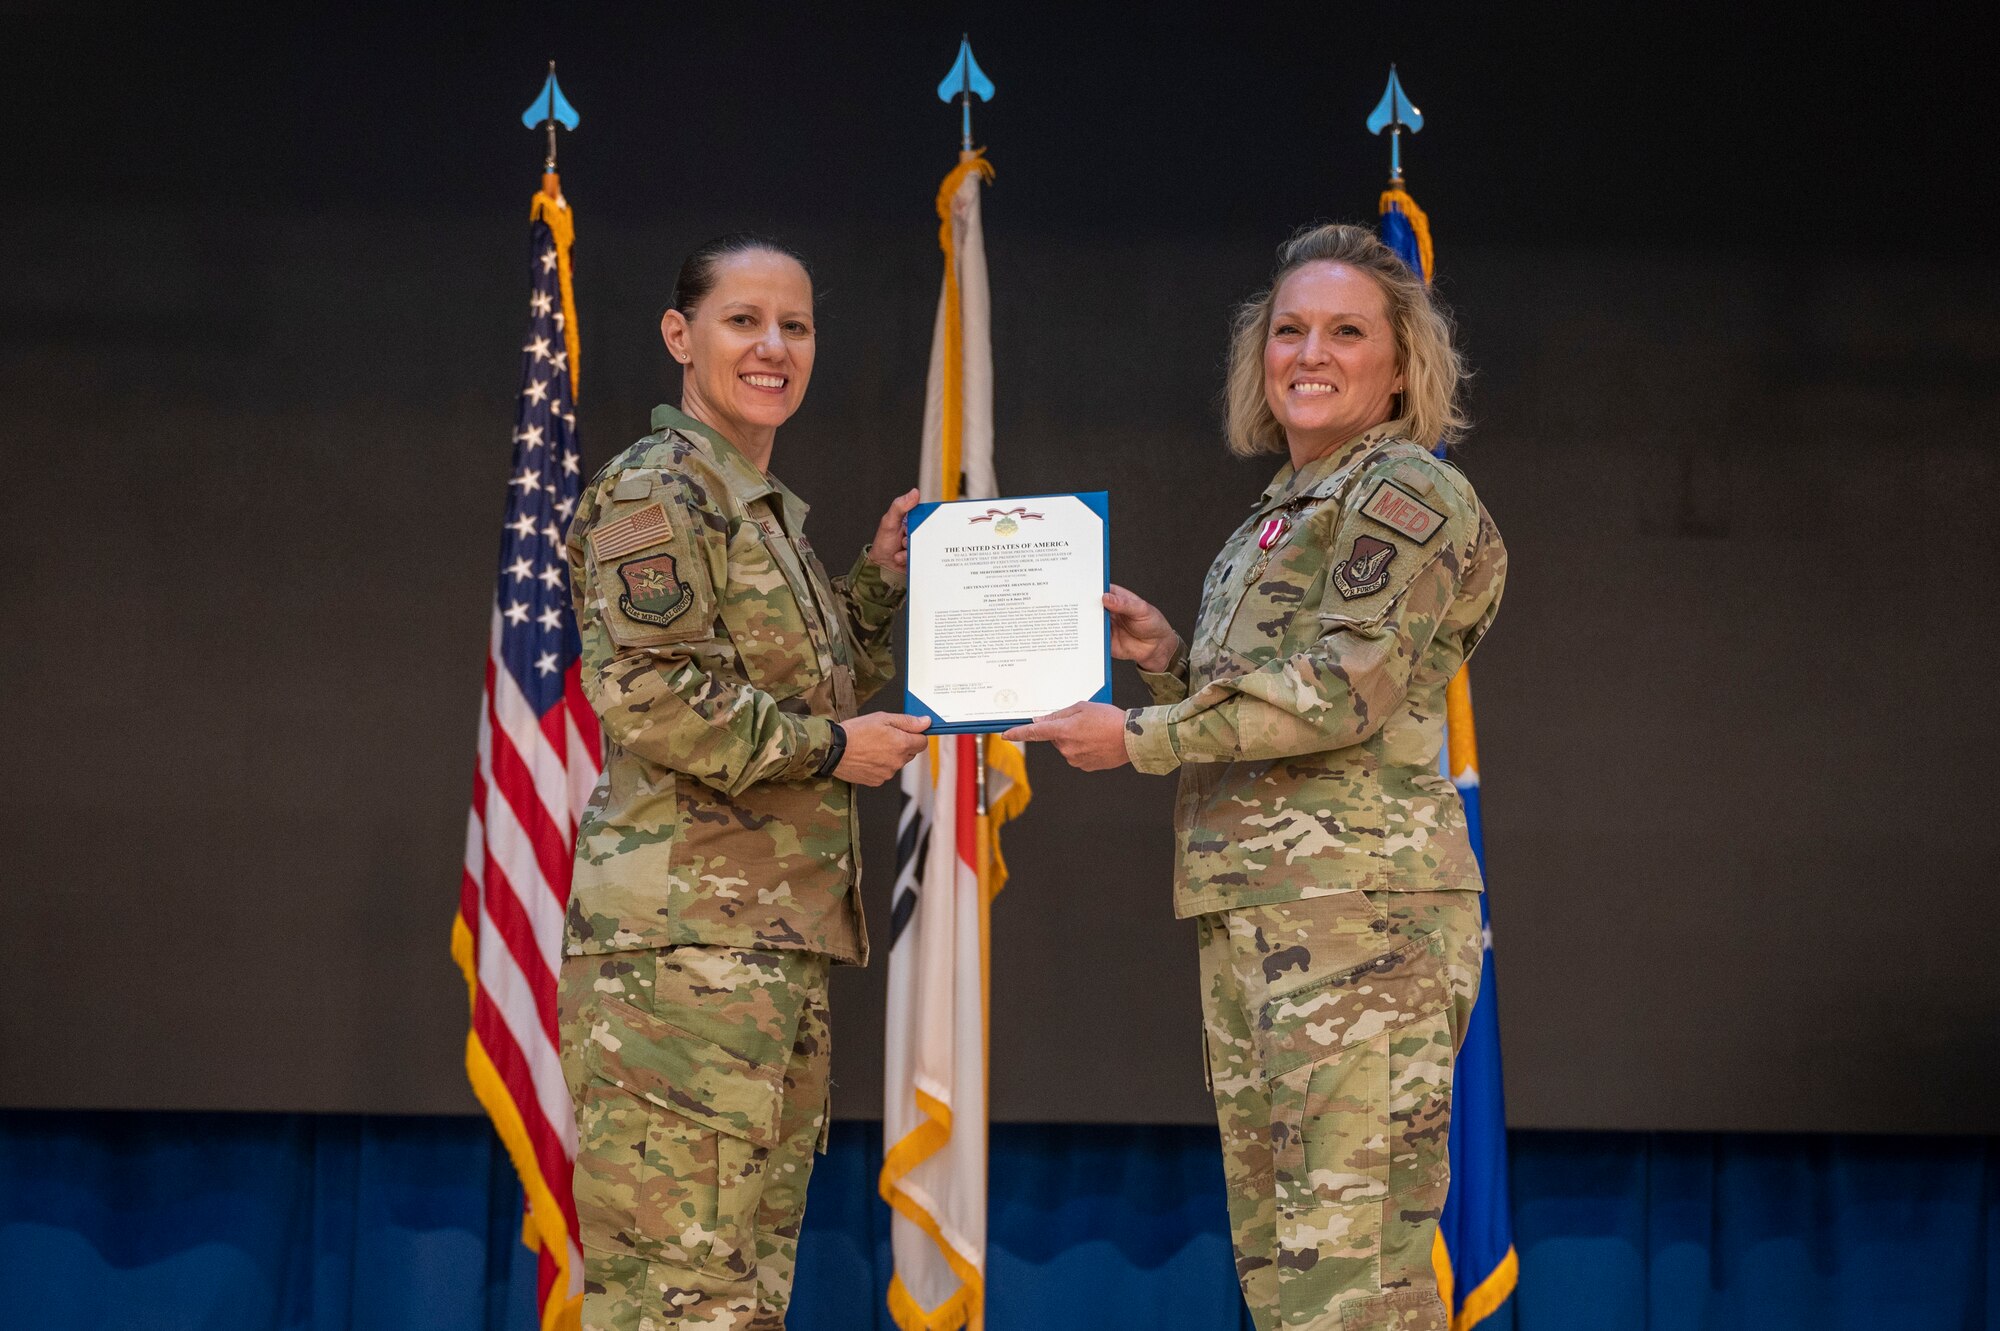 U.S. Air Force Col. Jennifer Vecchione, left, 51st Medical Group commander, presents a Meritorious Service Medal to Lt. Col. Shannon Hunt, 51st Operational Medical Readiness Squadron outgoing commander, at Osan Air Base, Republic of Korea, June 8, 2023. The MSM is a military decoration awarded by various branches of the Armed Forces to recognize distinguished or outstanding meritorious service. (U.S. Air Force photo by Airman 1st Class Aaron Edwards)